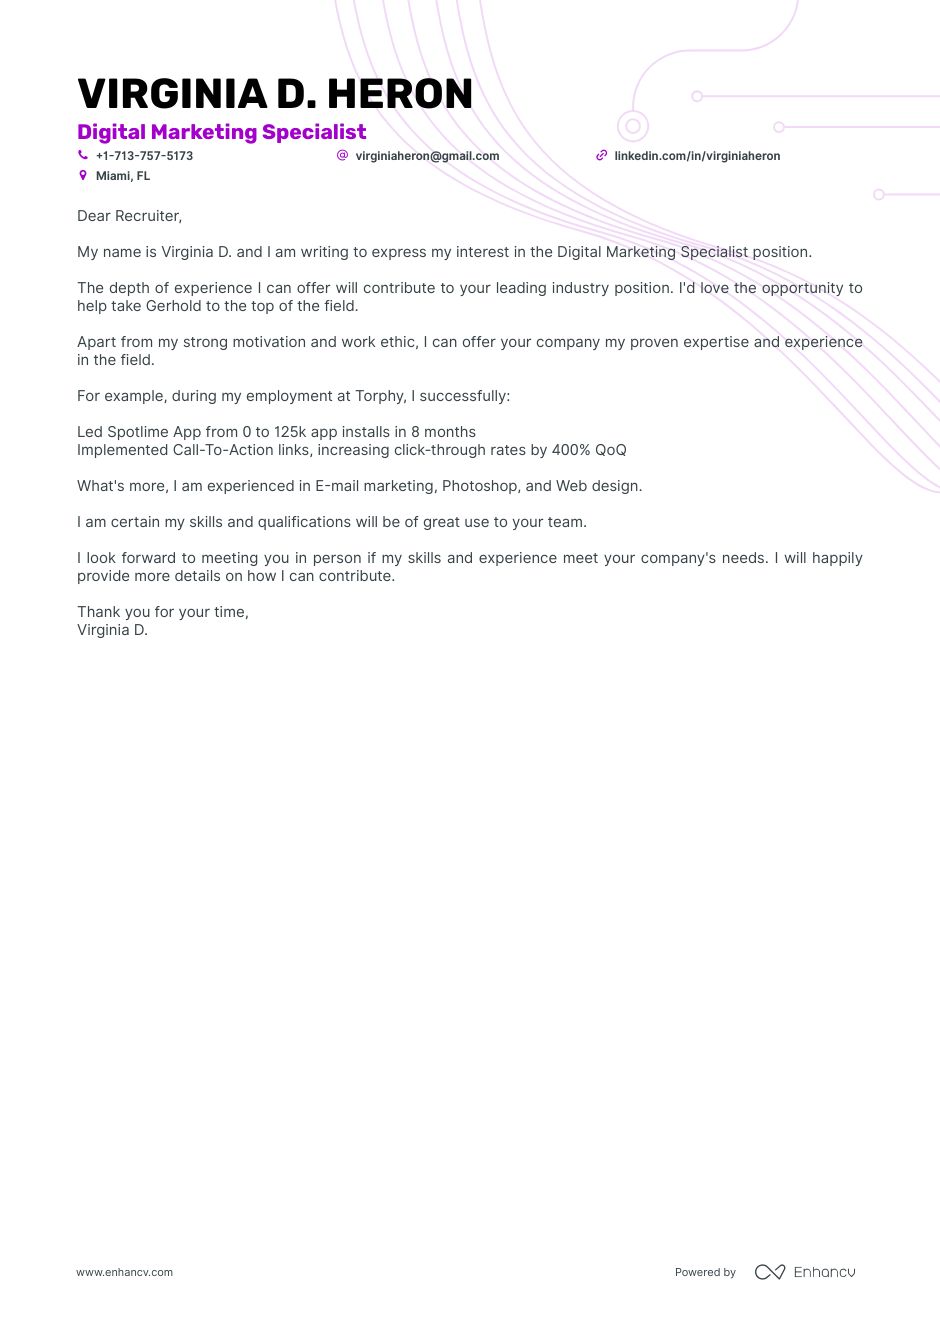 digital marketing specialist coverletter.png